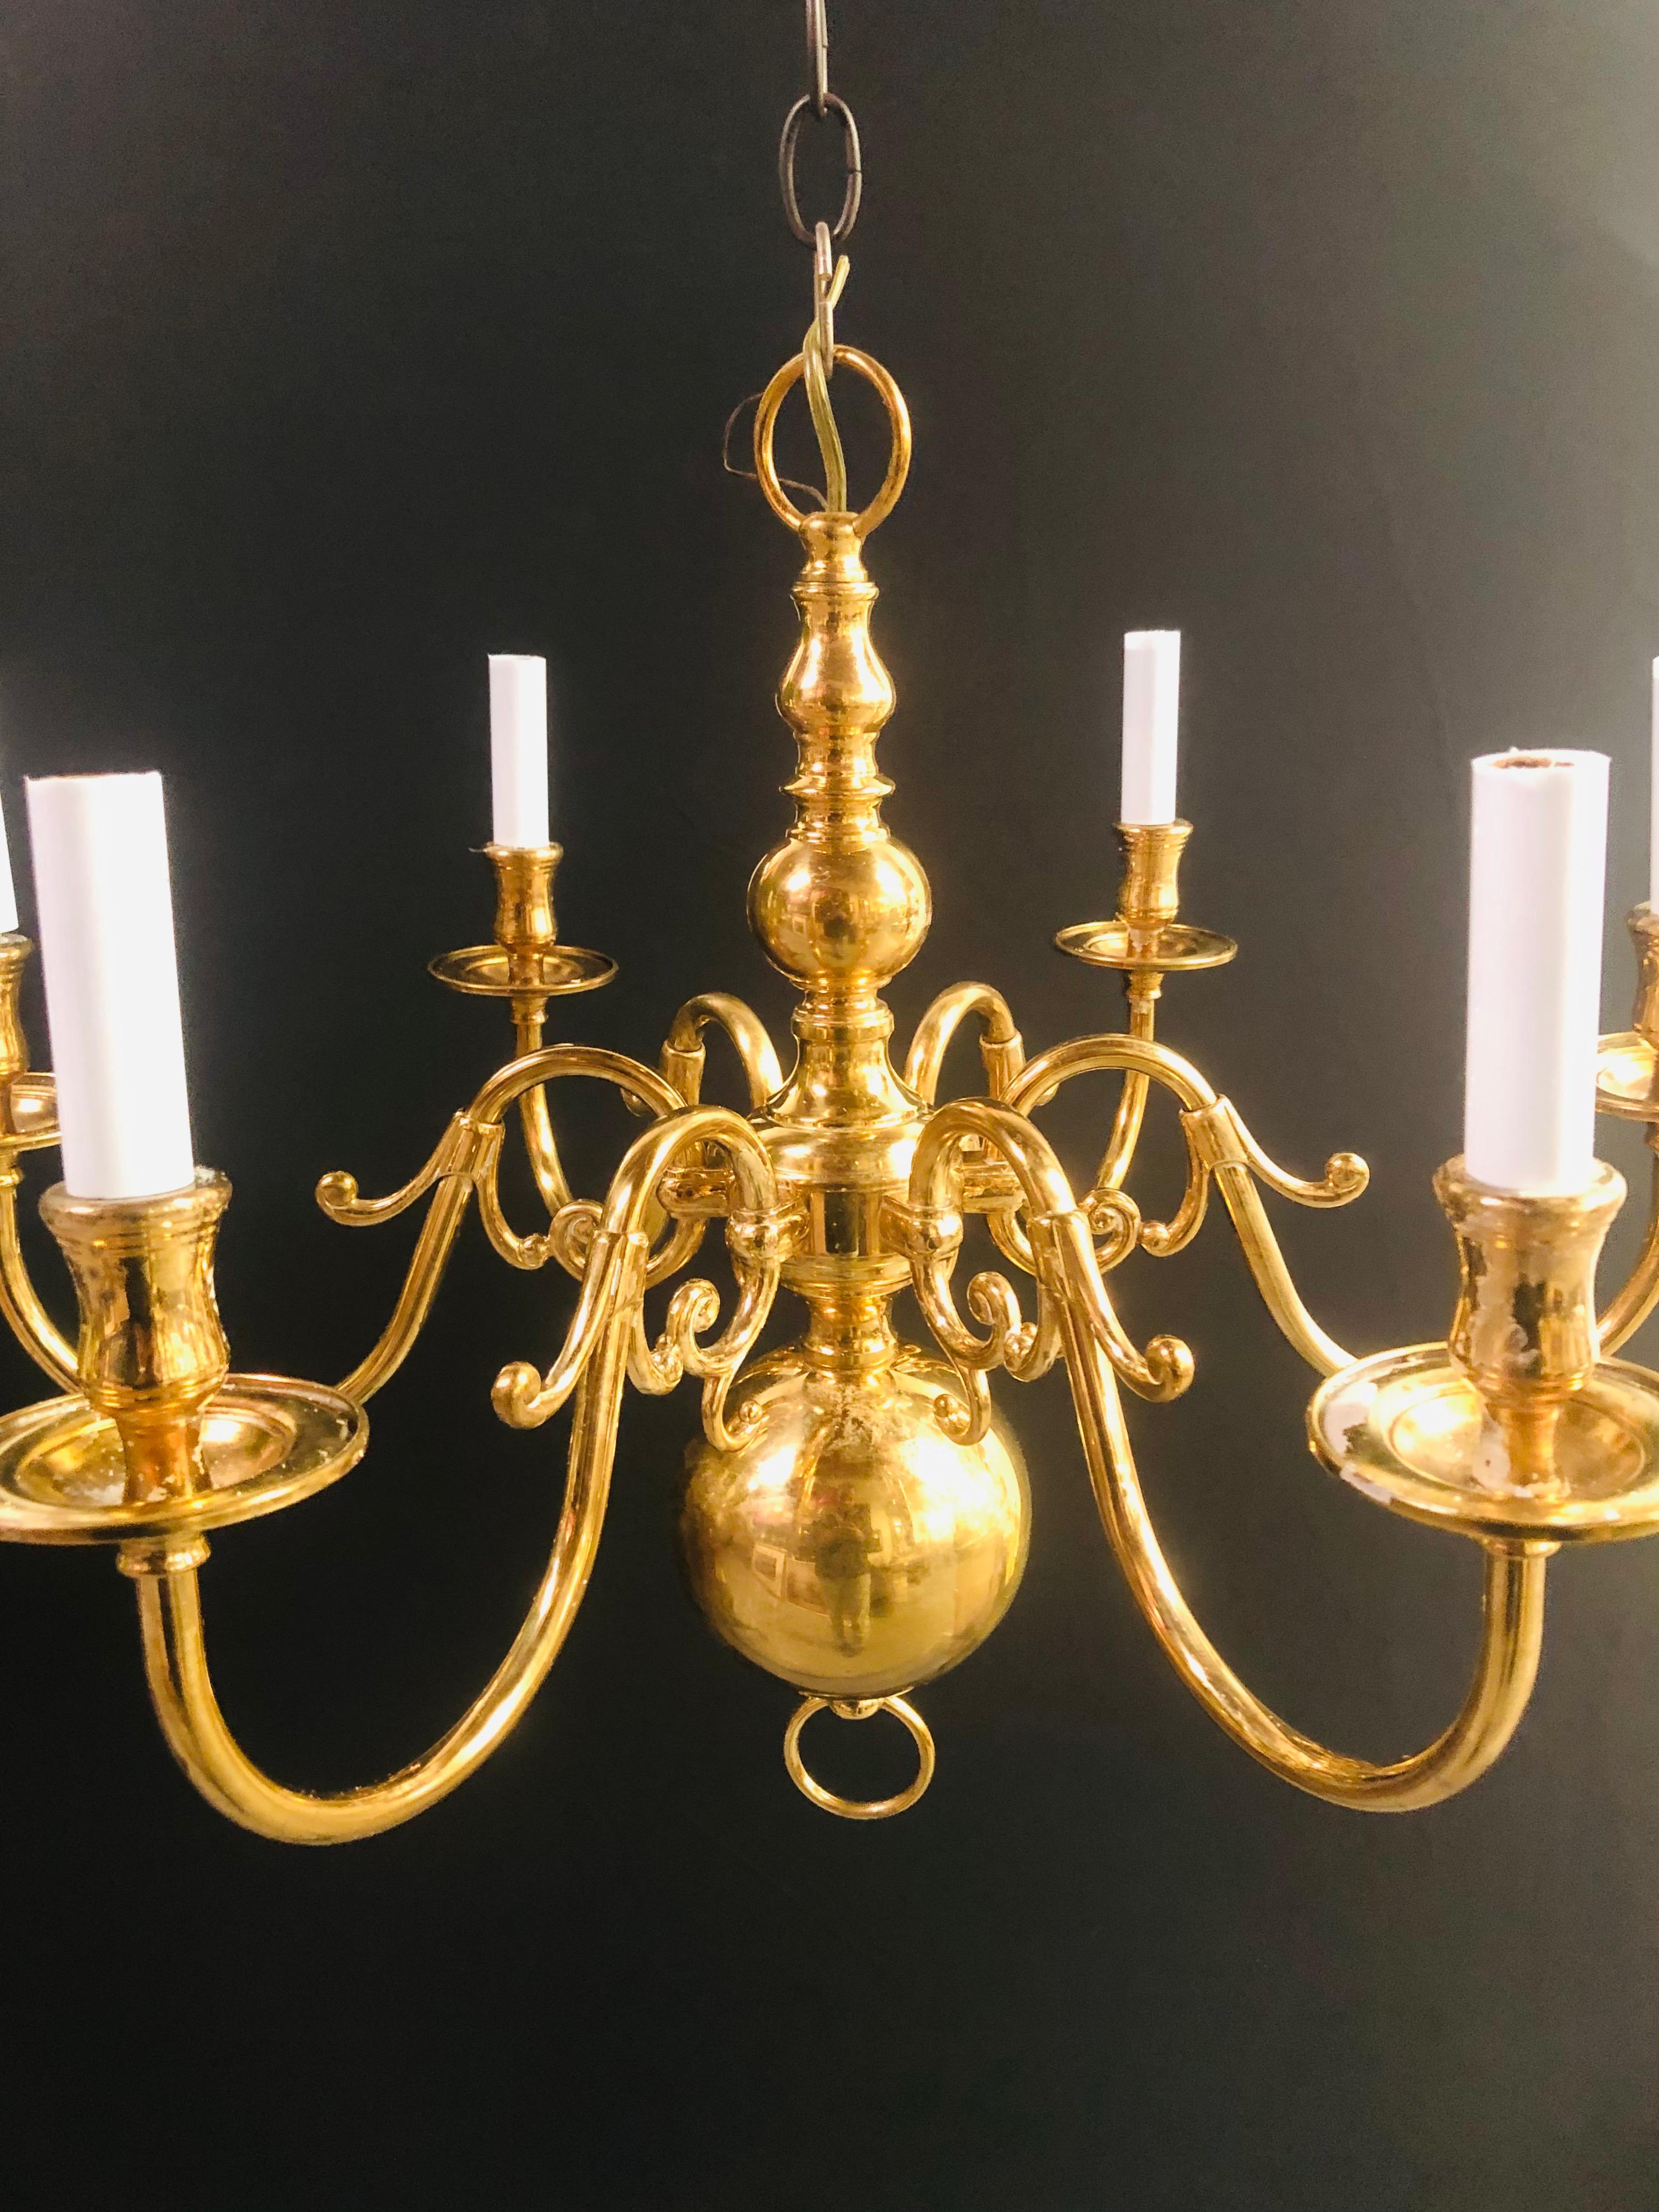 A Classic solid brass English Georgian style chandelier holding 6 candelabras and featuring fine arms ending in scroll design. The chandelier column ending in a large ball shaped bottom 

Georgian brass chandelier with 6 arms. Dimensions: 19